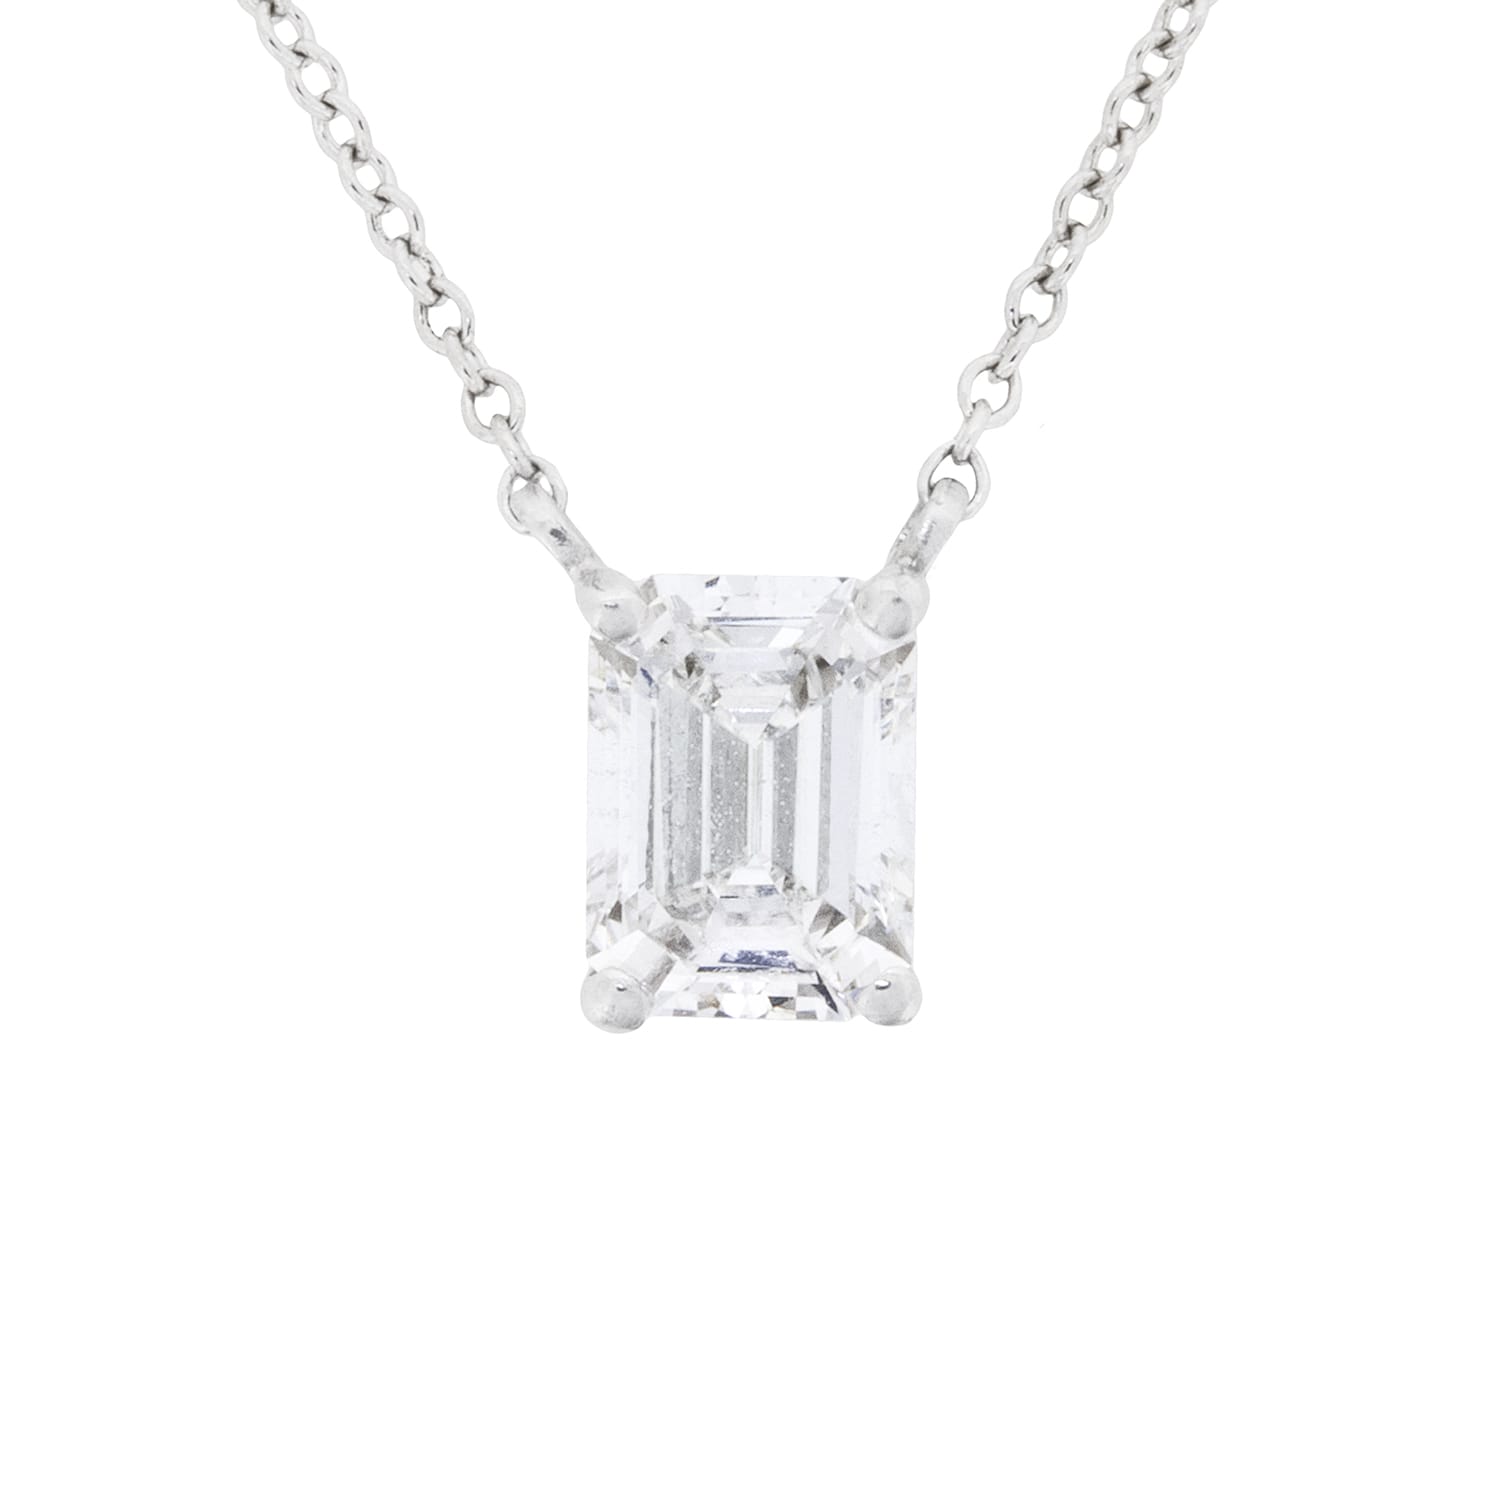 31.82ct Emerald Cut Diamond Tennis Necklace in 18k White Gold – Mark  Broumand